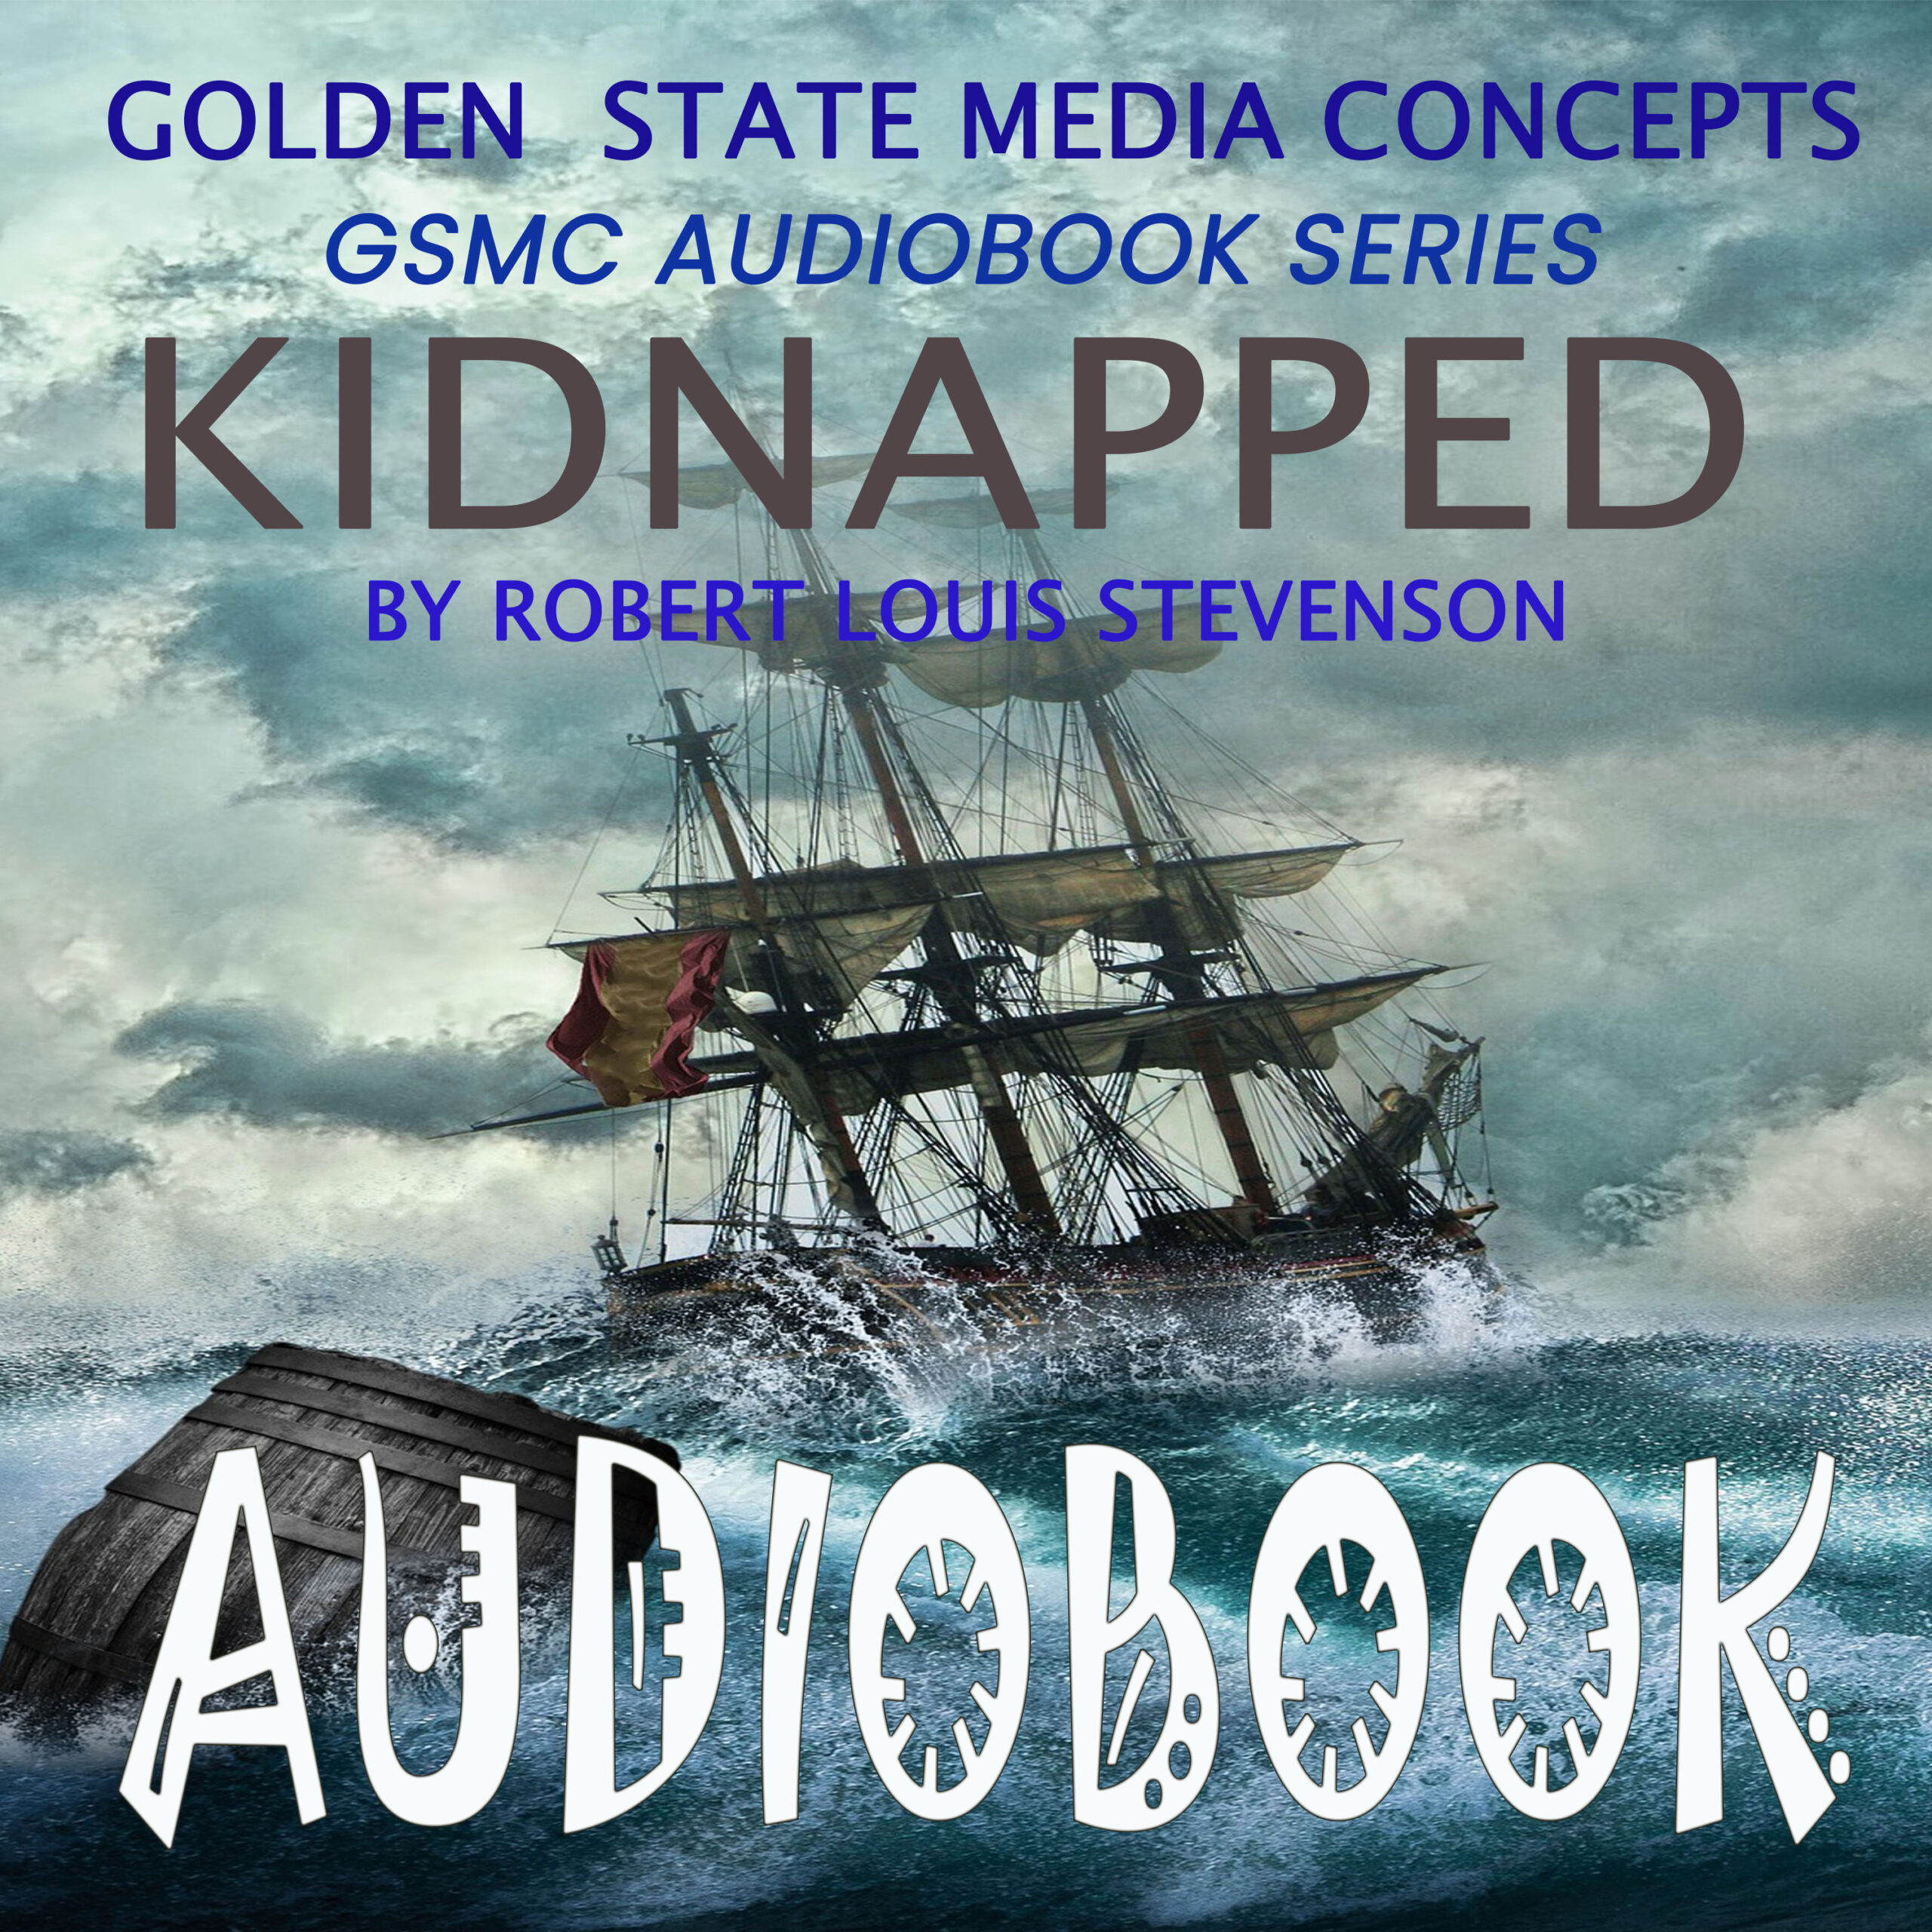 GSMC Audiobook Series: Kidnapped